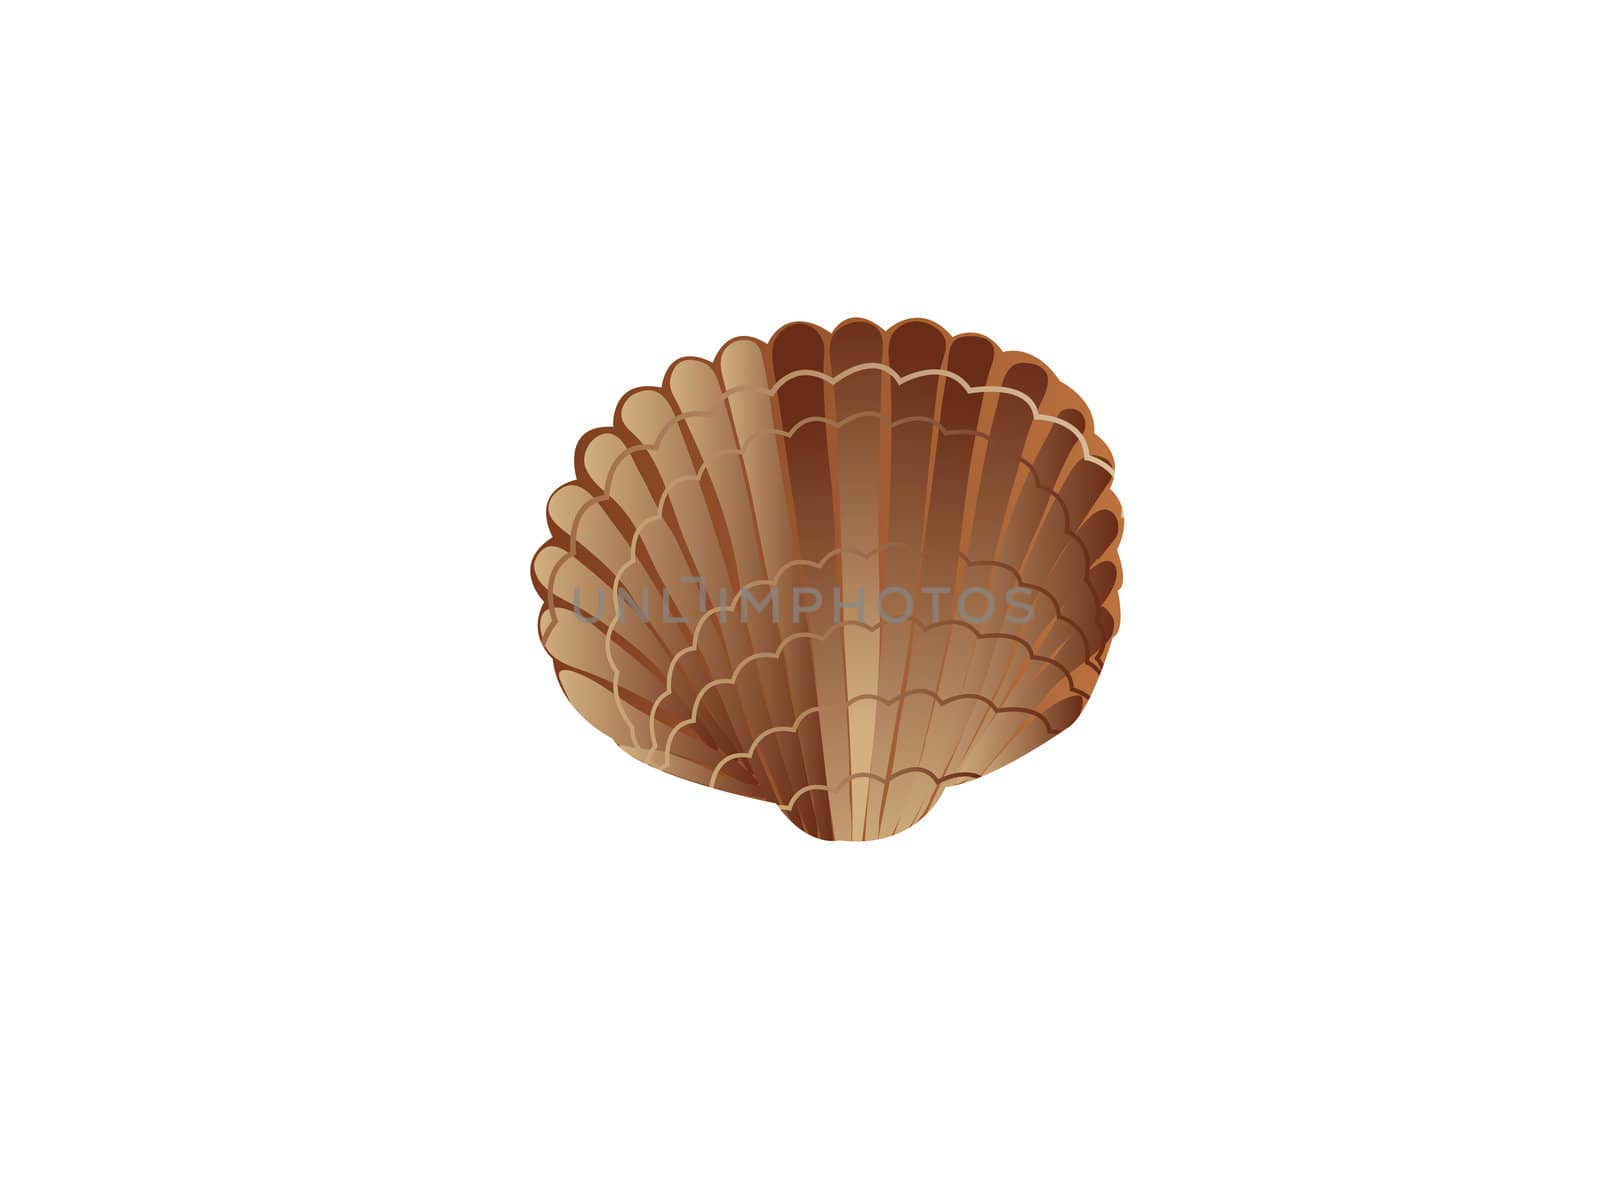 scallop shell by imagerymajestic